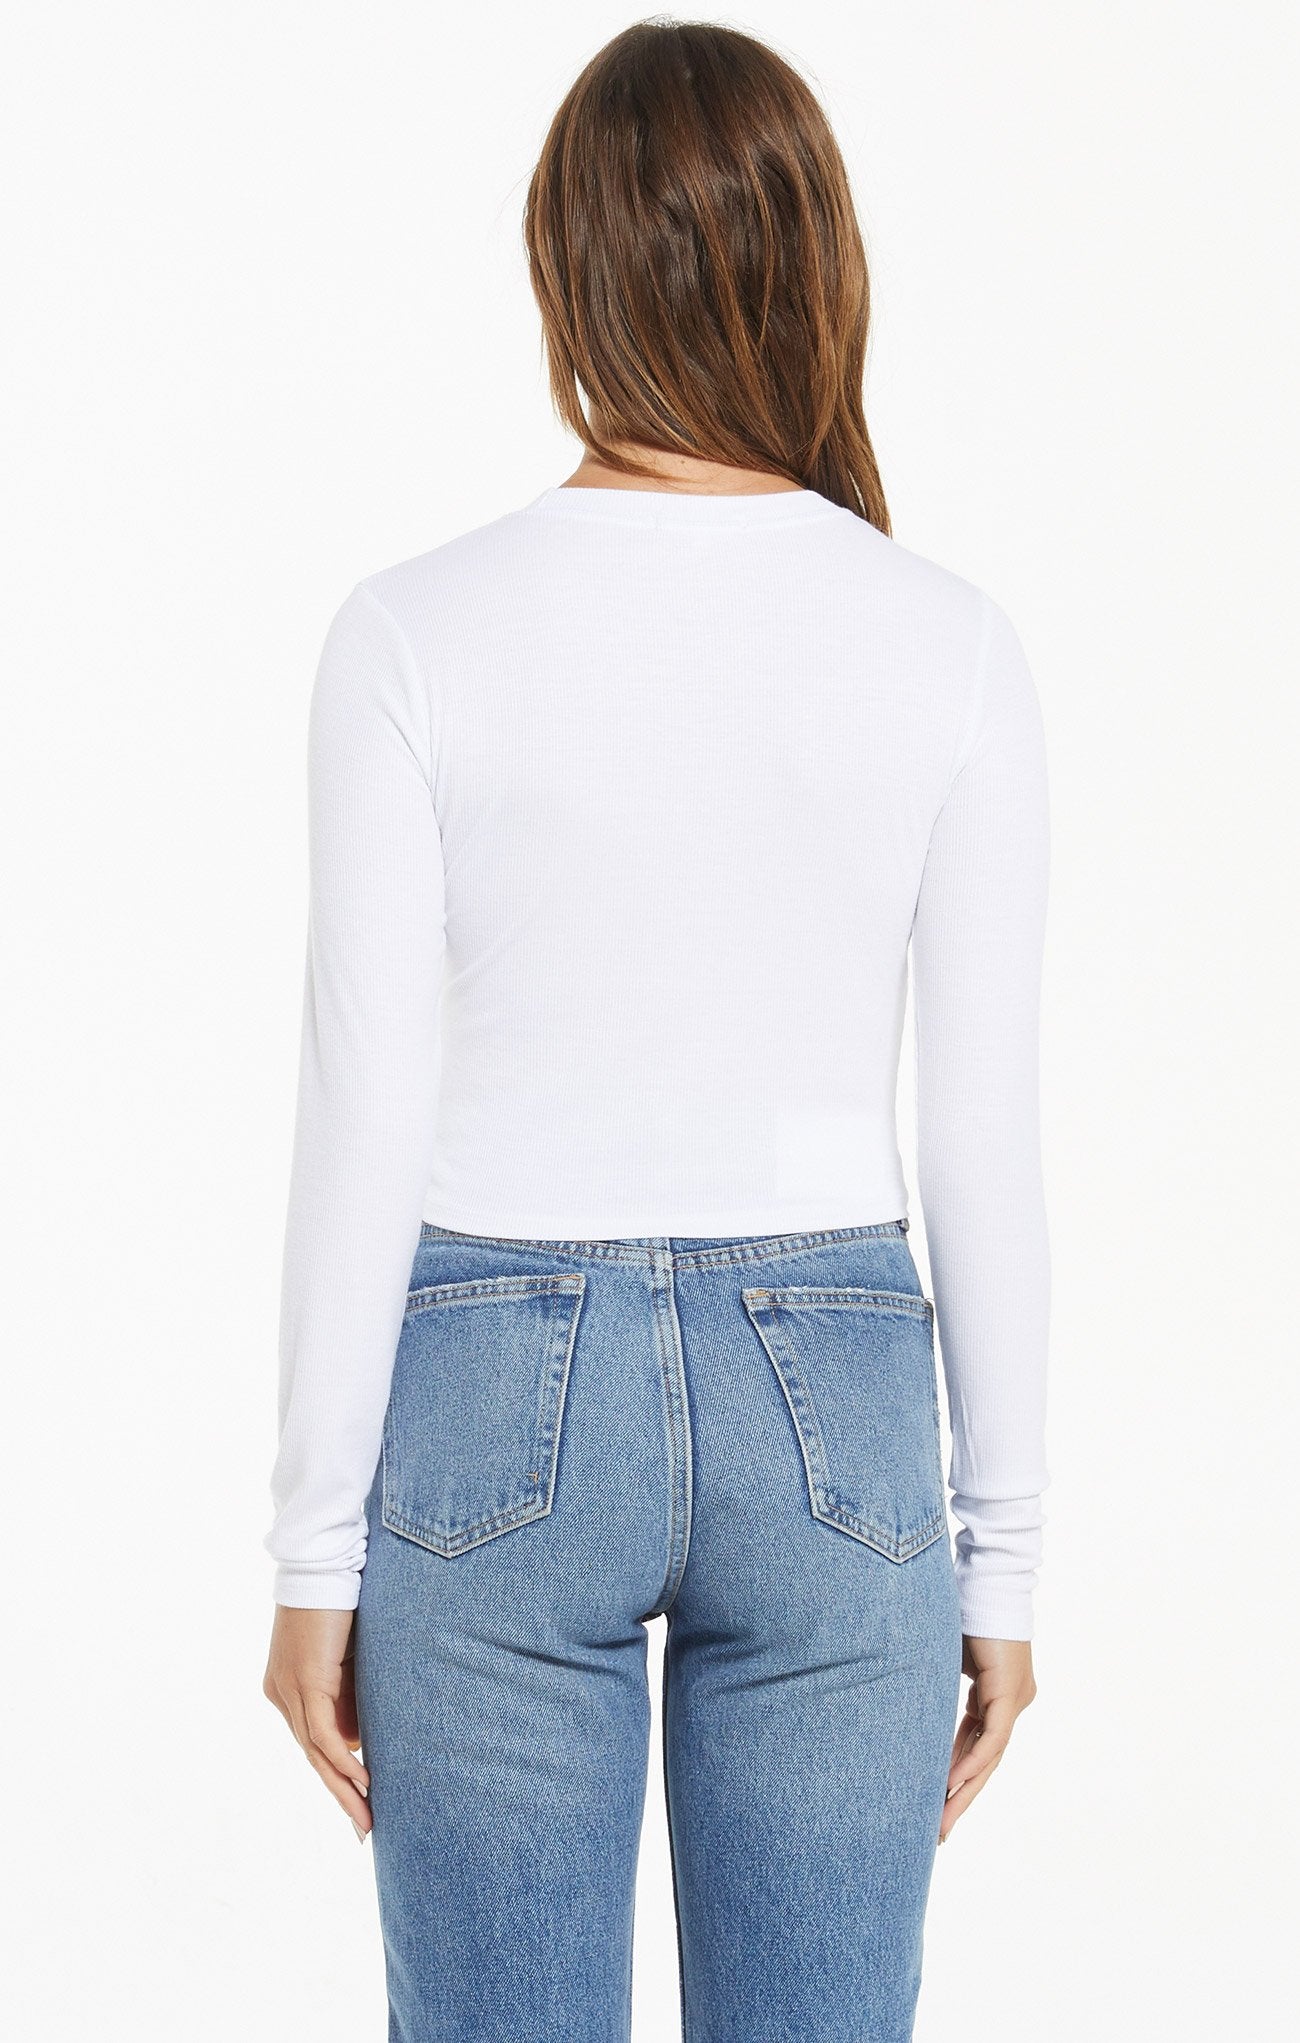 Z SUPPLY GELINA CROPPED LONG SLEEVE TOP IN WHITE